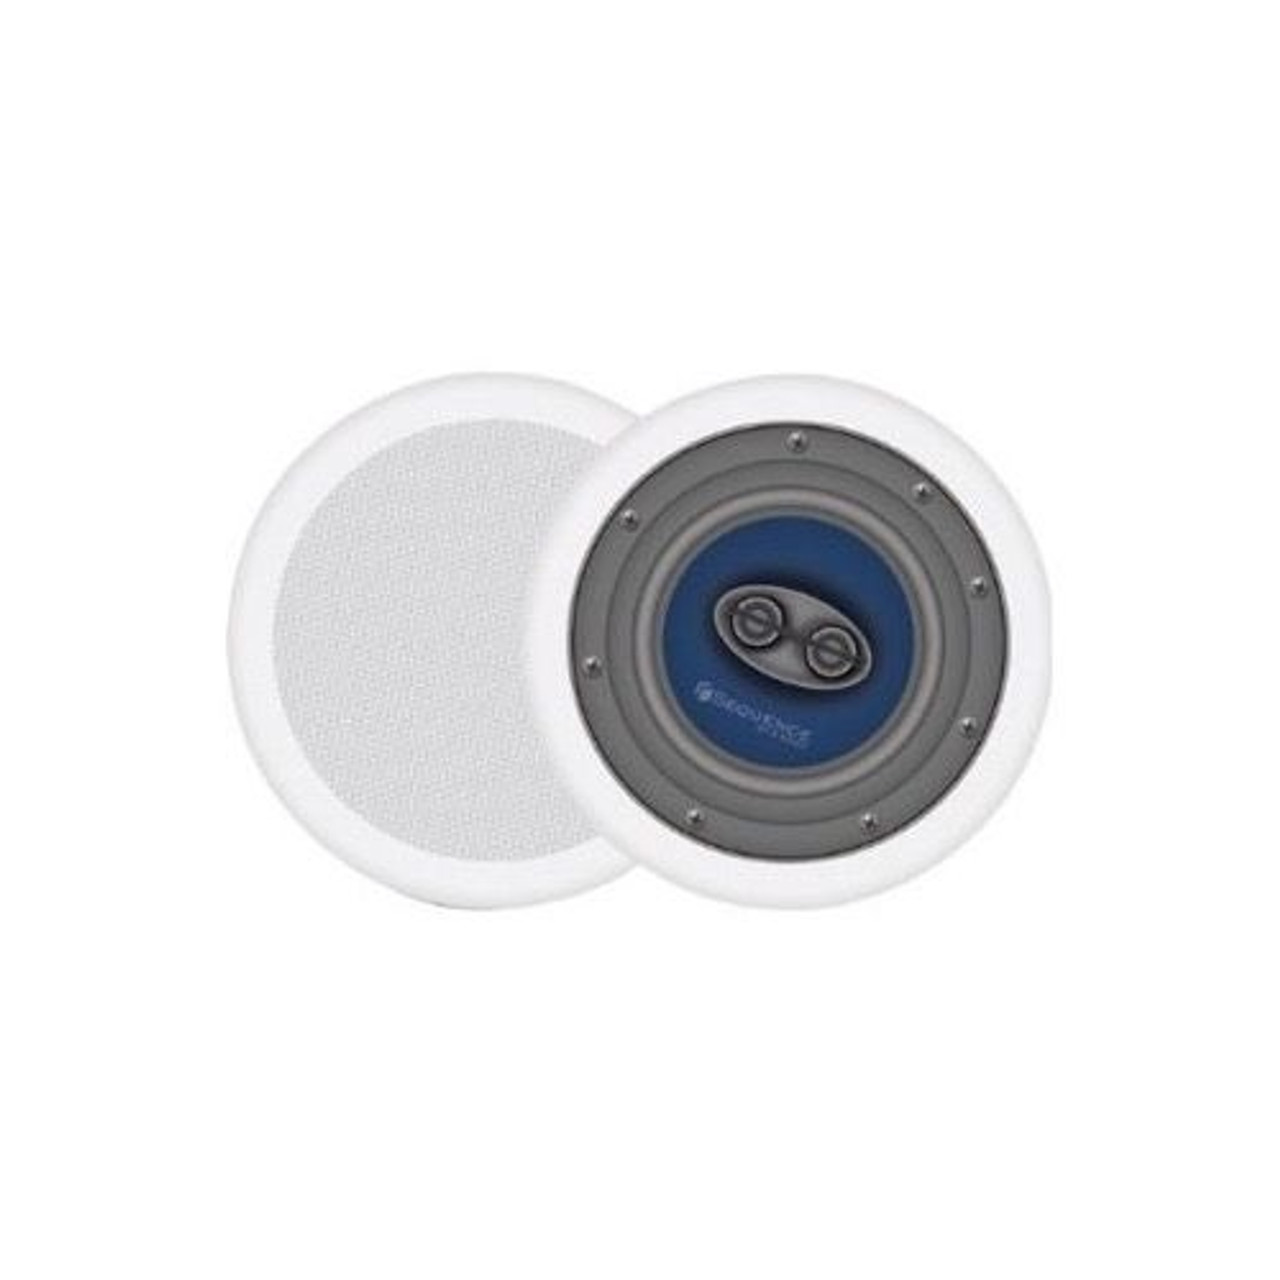 Sequence 730-202 Premier Series 6 1/2" inch Two Way Dual Coil Stereo Ceiling Speaker by Steren